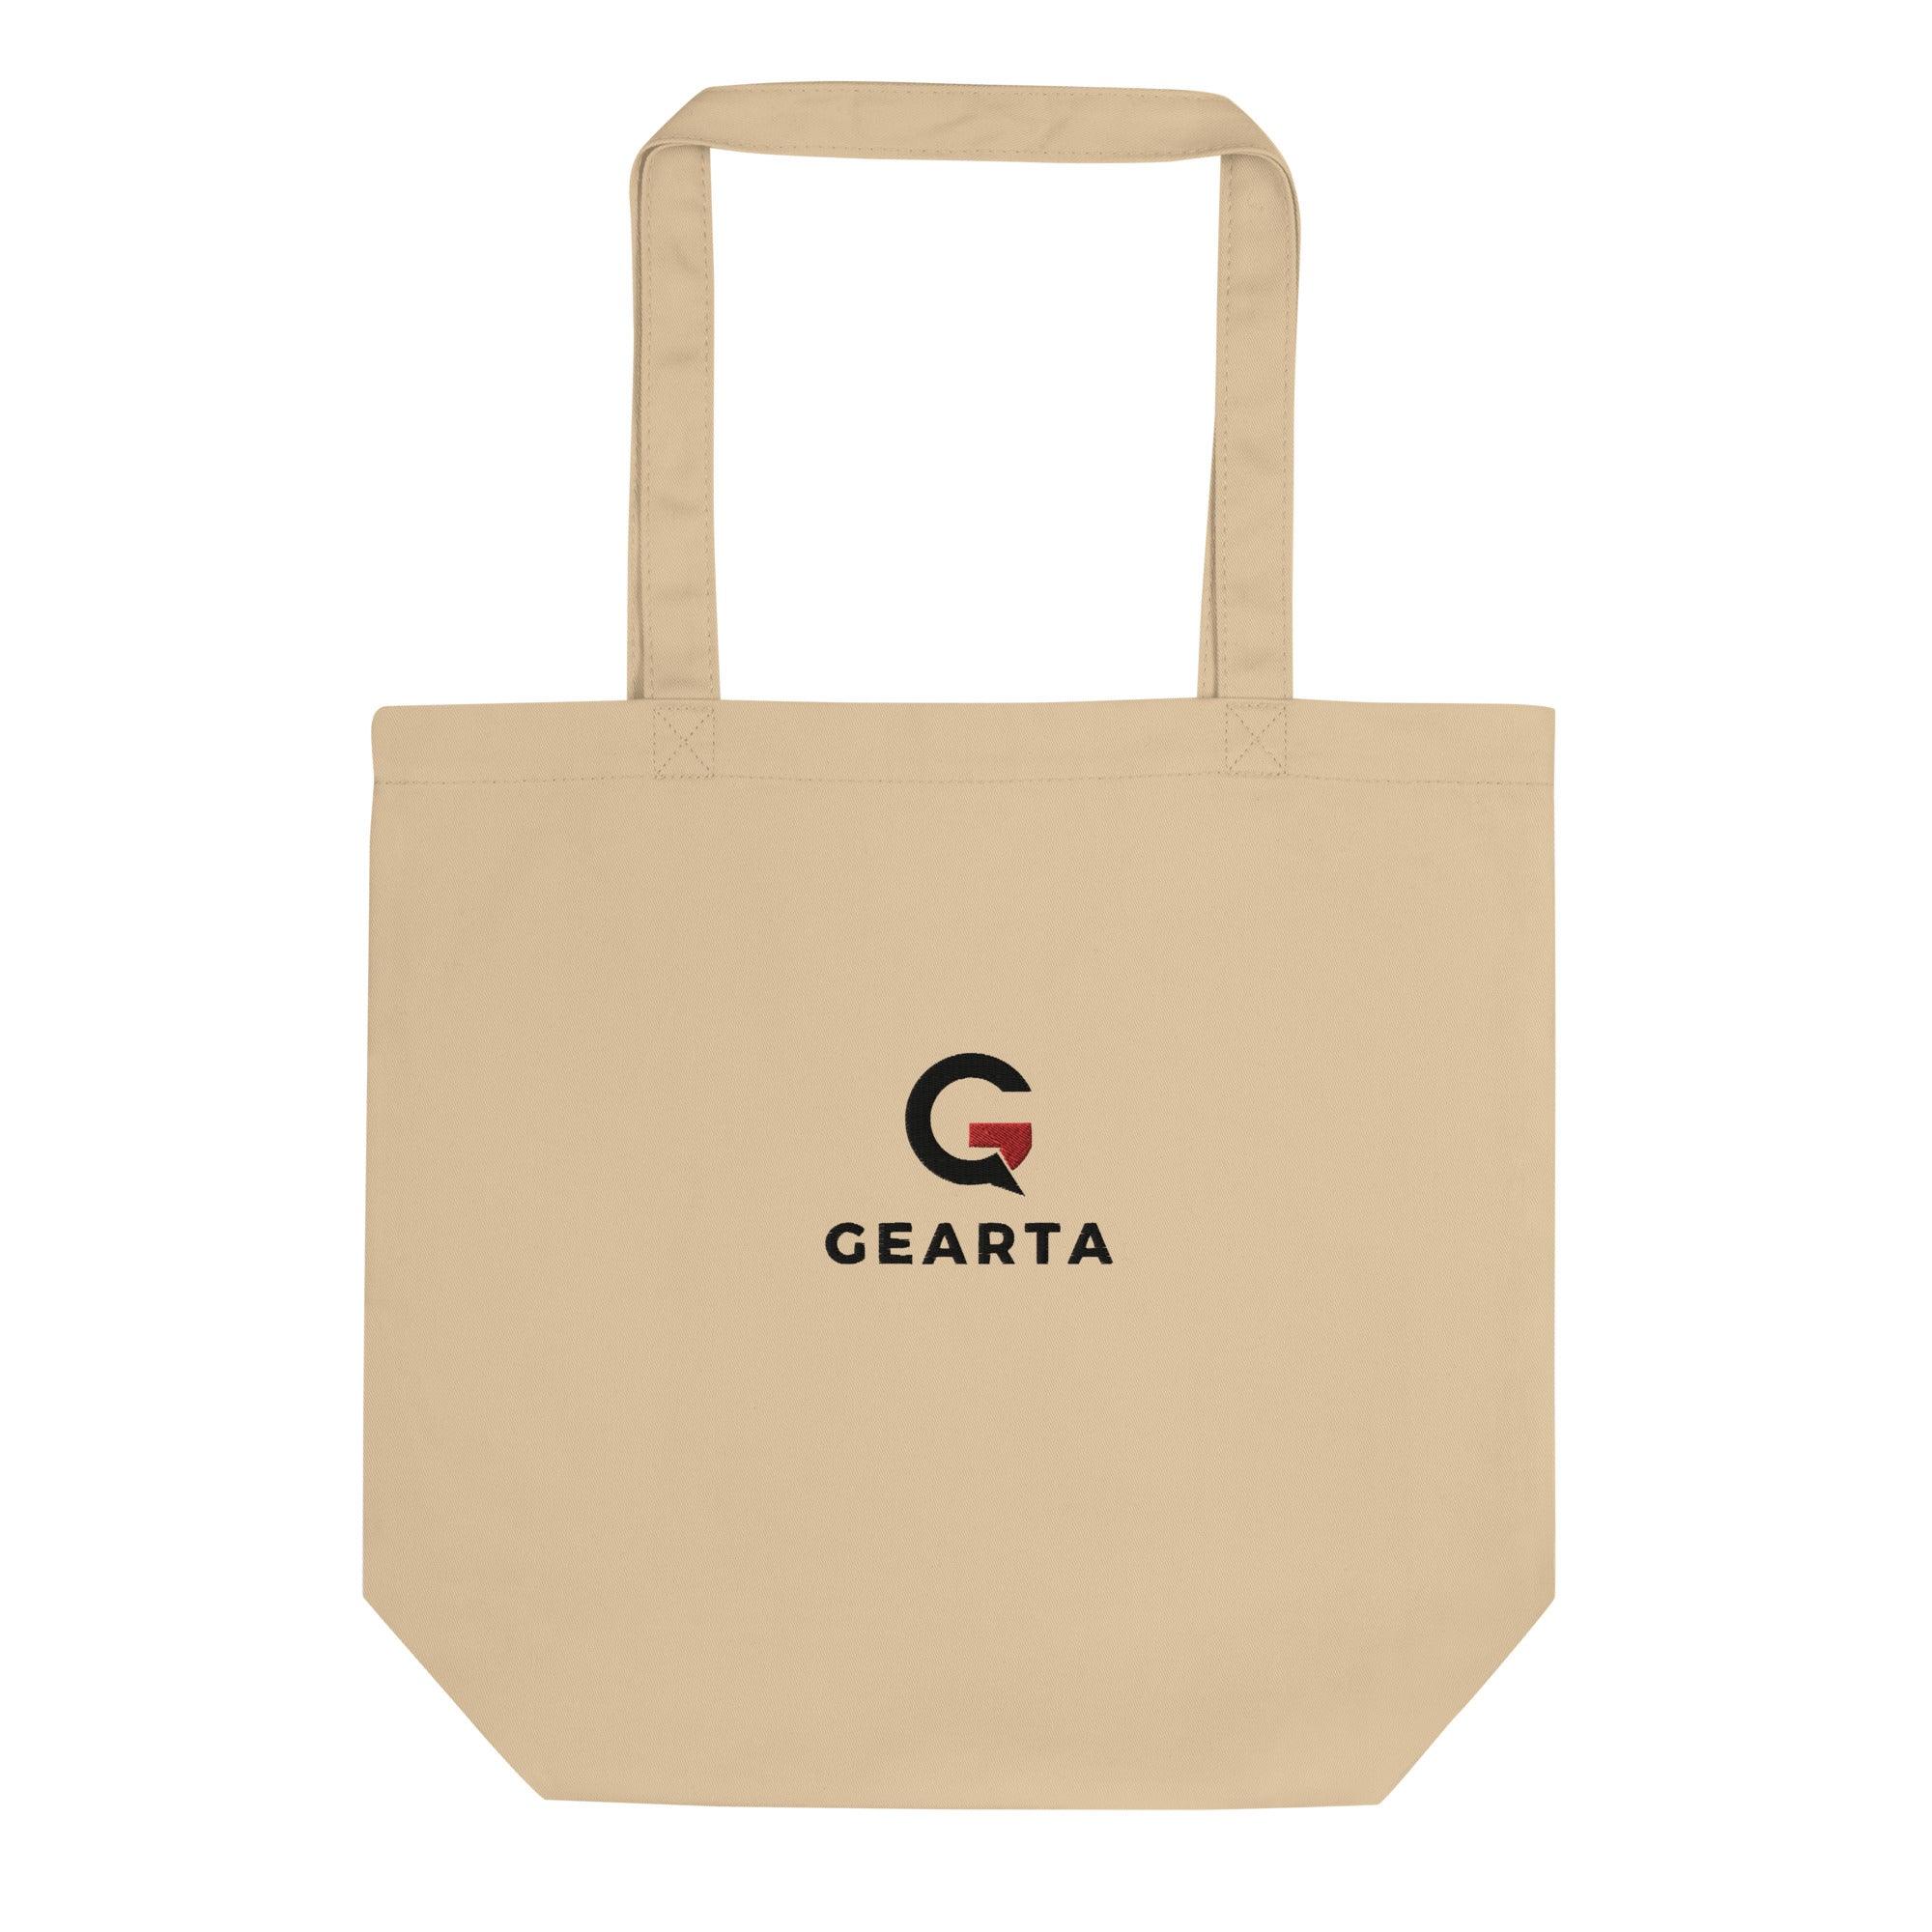 GEARTA - Beige Environmentally Sustainable Tote